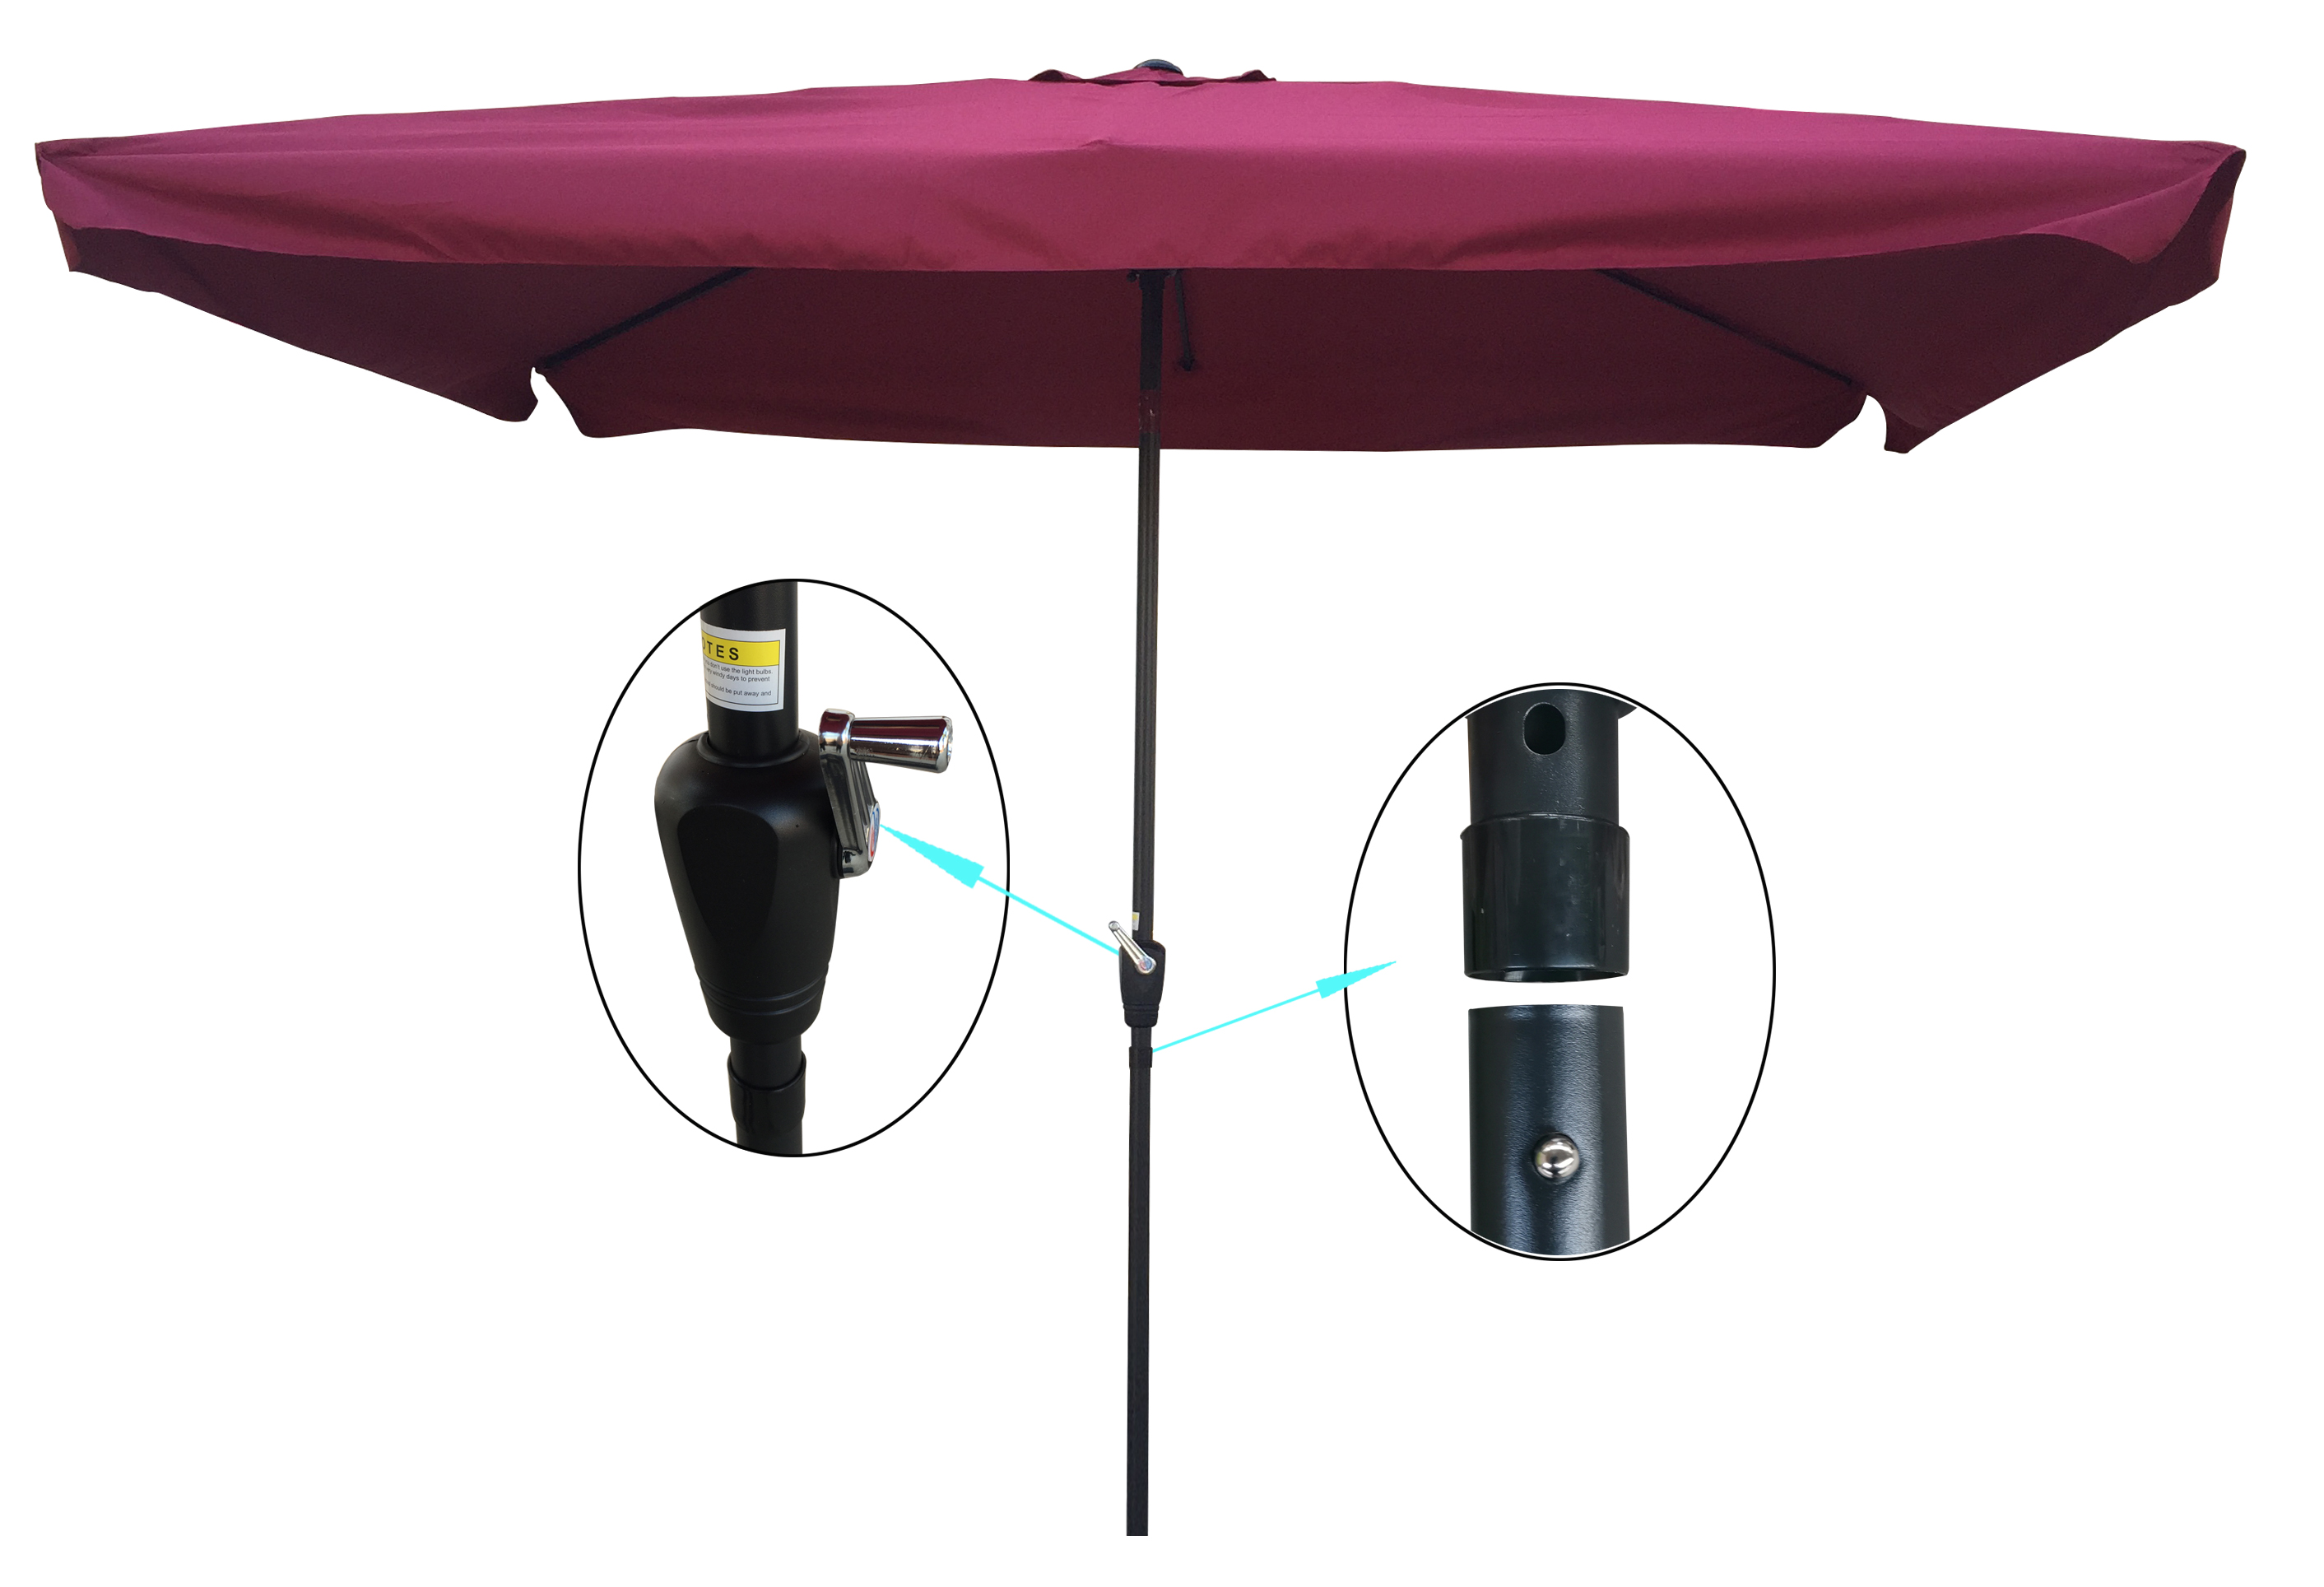 10 x 6.5ft Rectangular Patio Outdoor Market Table Umbrellas with Crank and Push Button Tilt for Garden Pool Shade  Swimming Pool  Market-Boyel Living